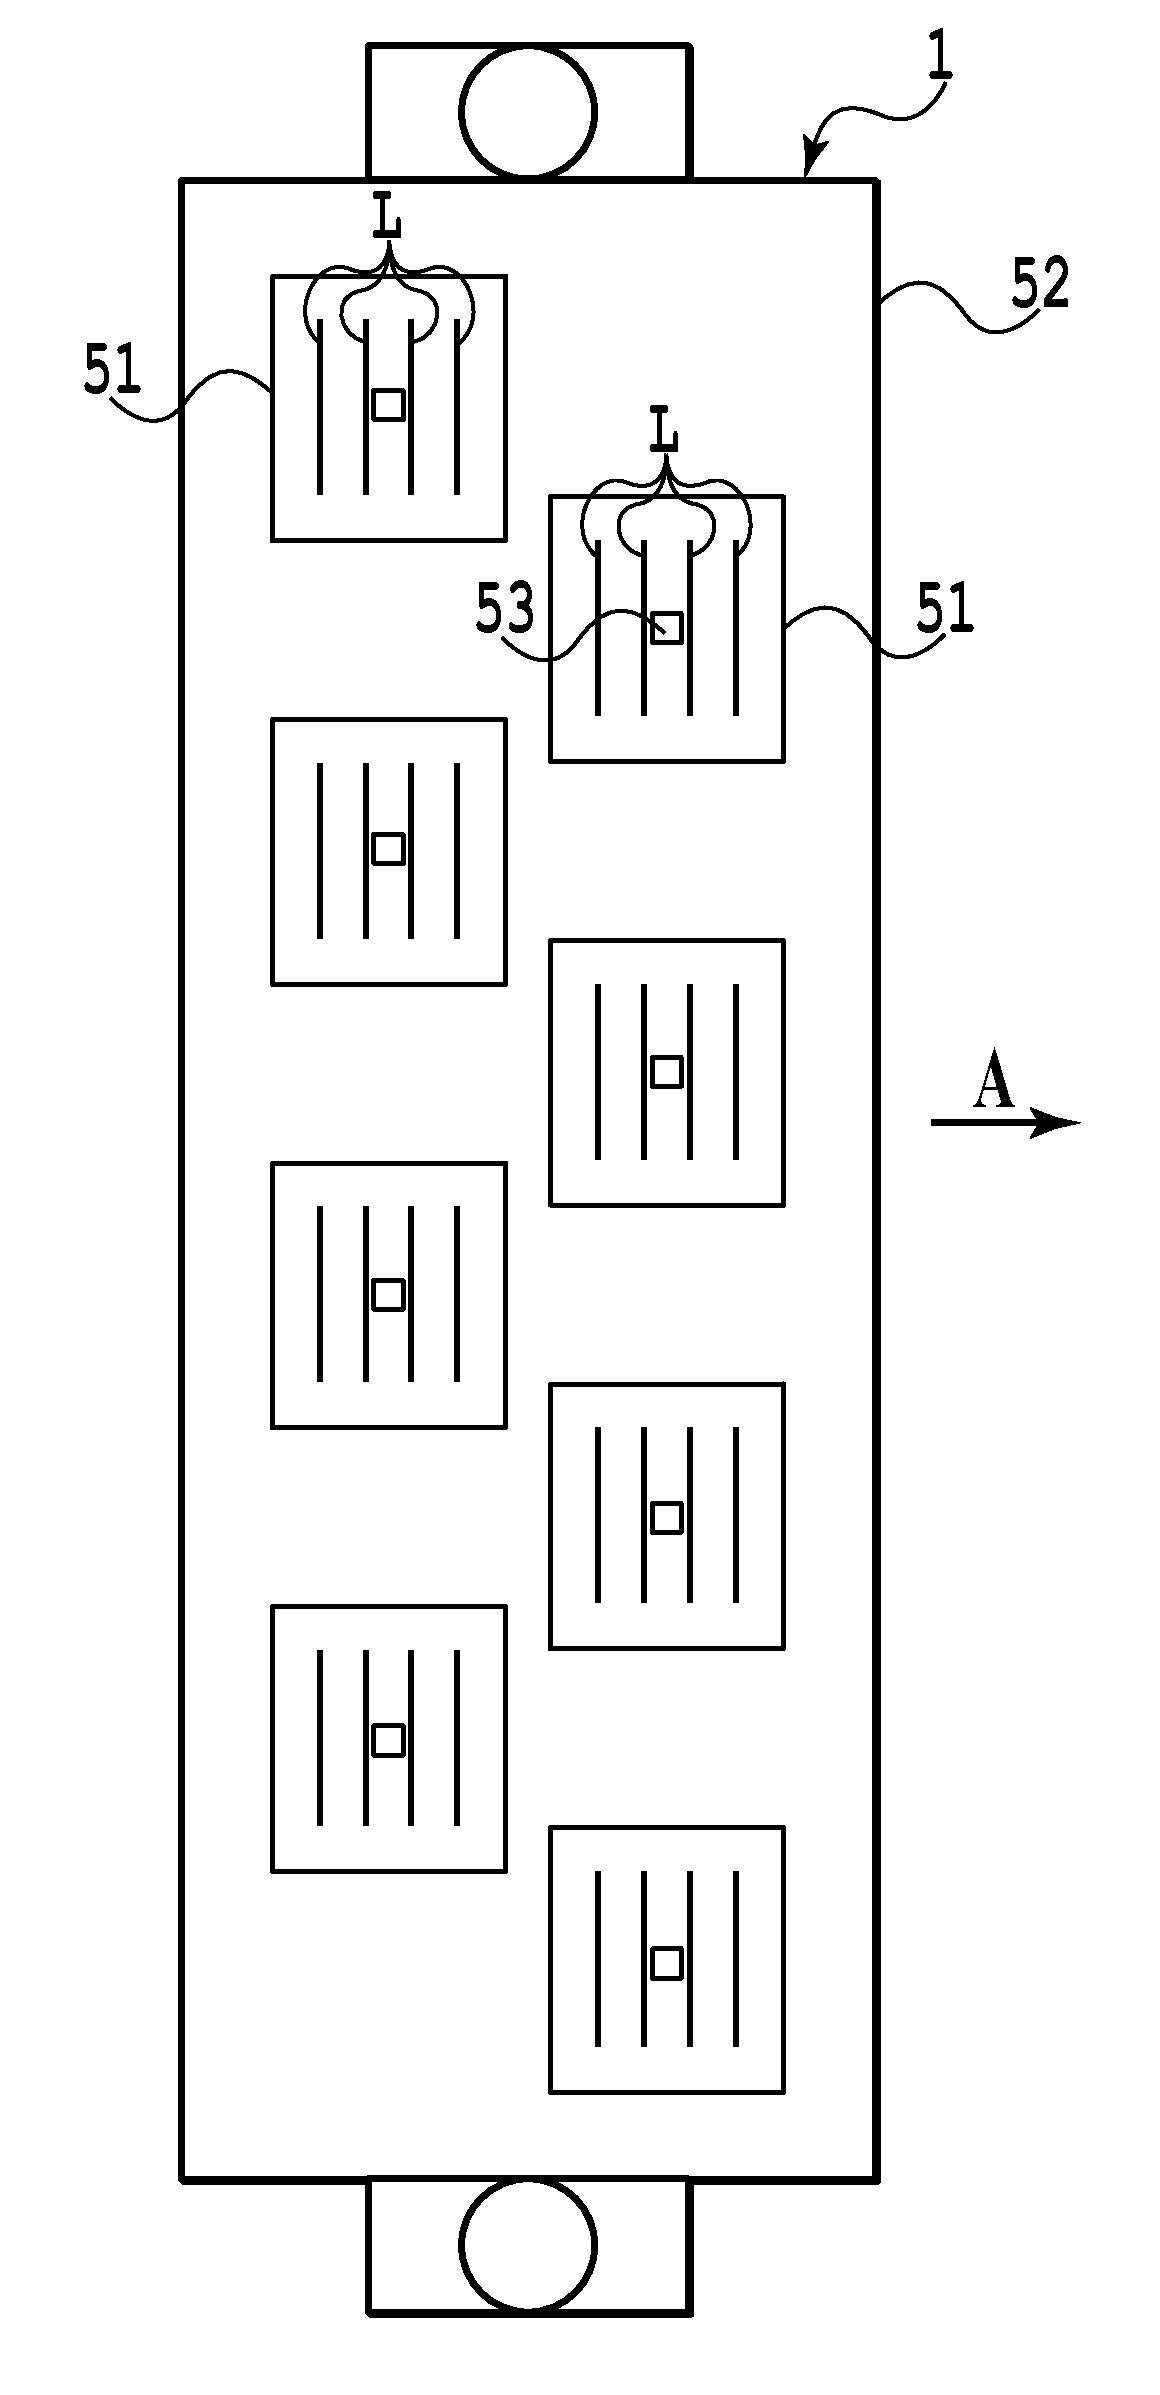 Printing apparatus and method for controlling printing apparatus